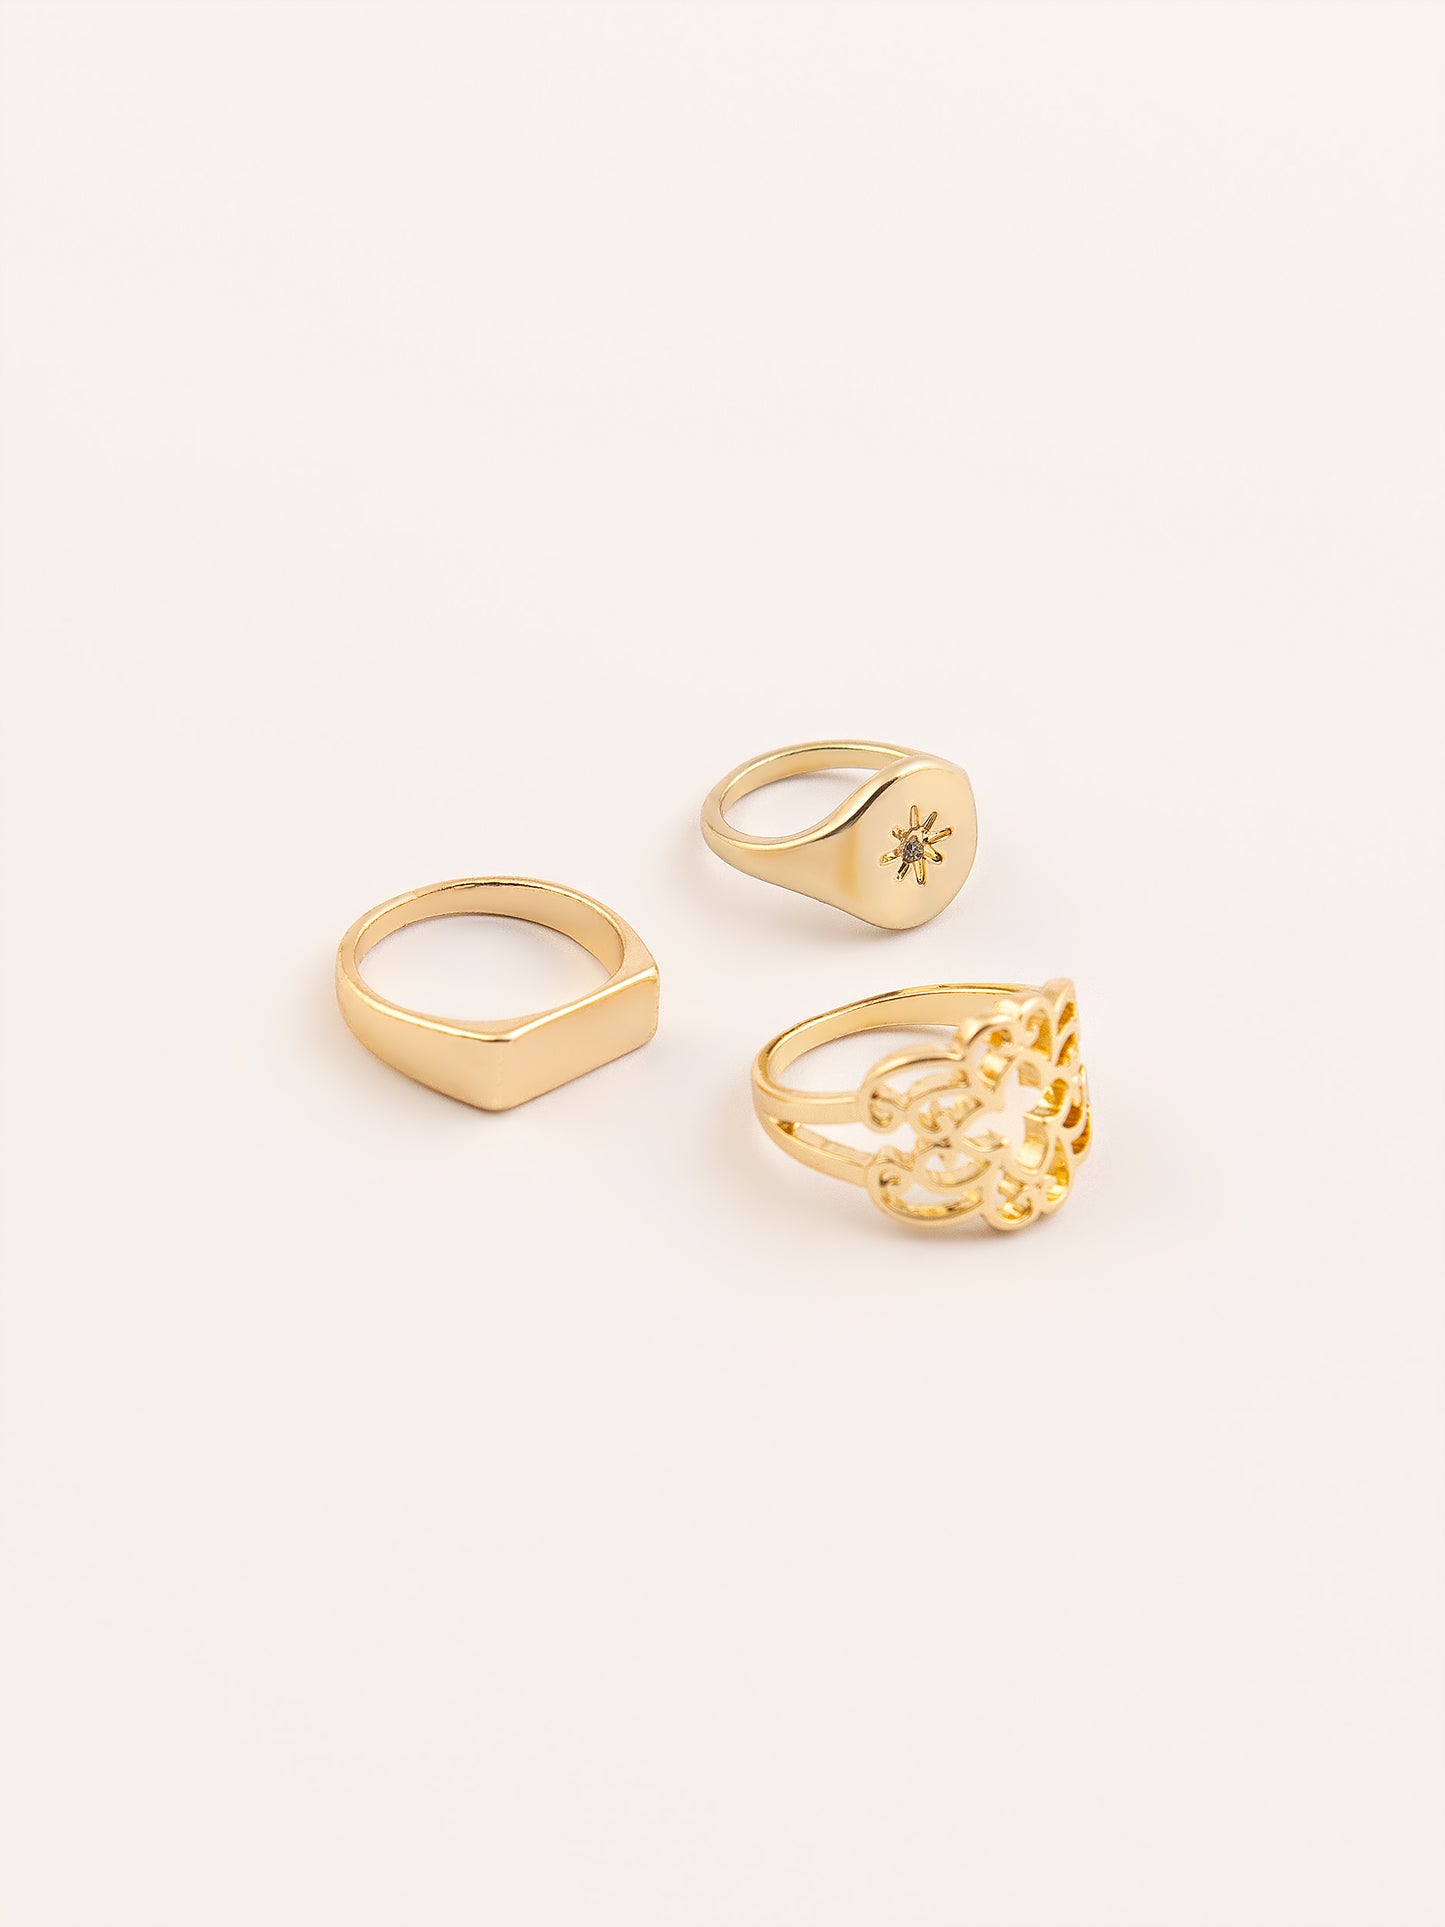 Antqiue Gold Rings Set